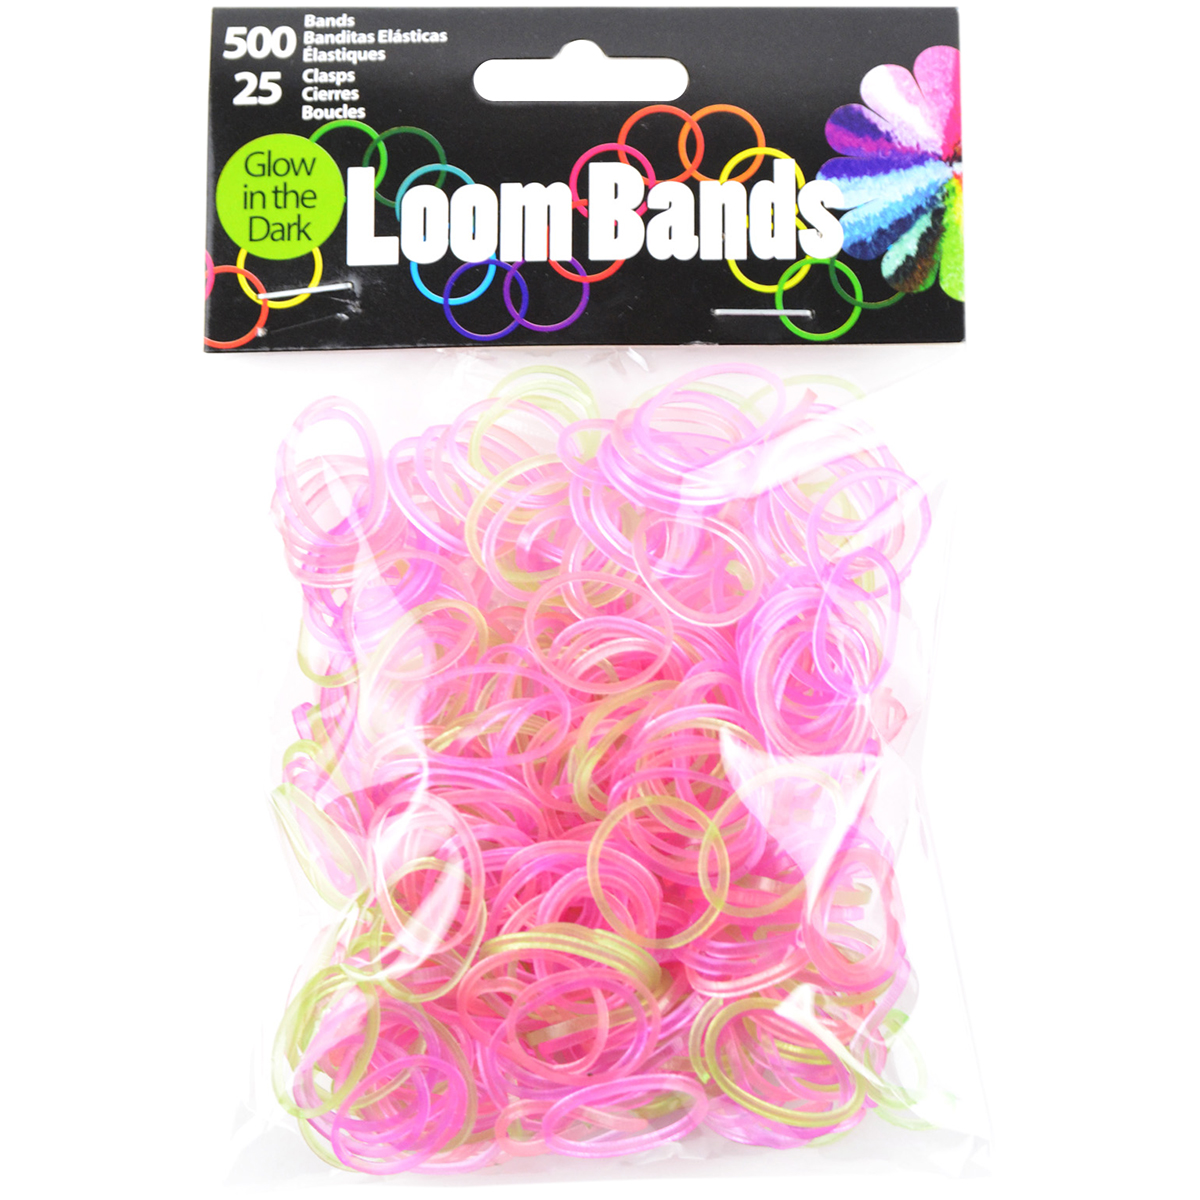 Loom Bands 500/Pkg W/25 Clasps-Glow-In-The-Dark Translucent - image 1 of 2